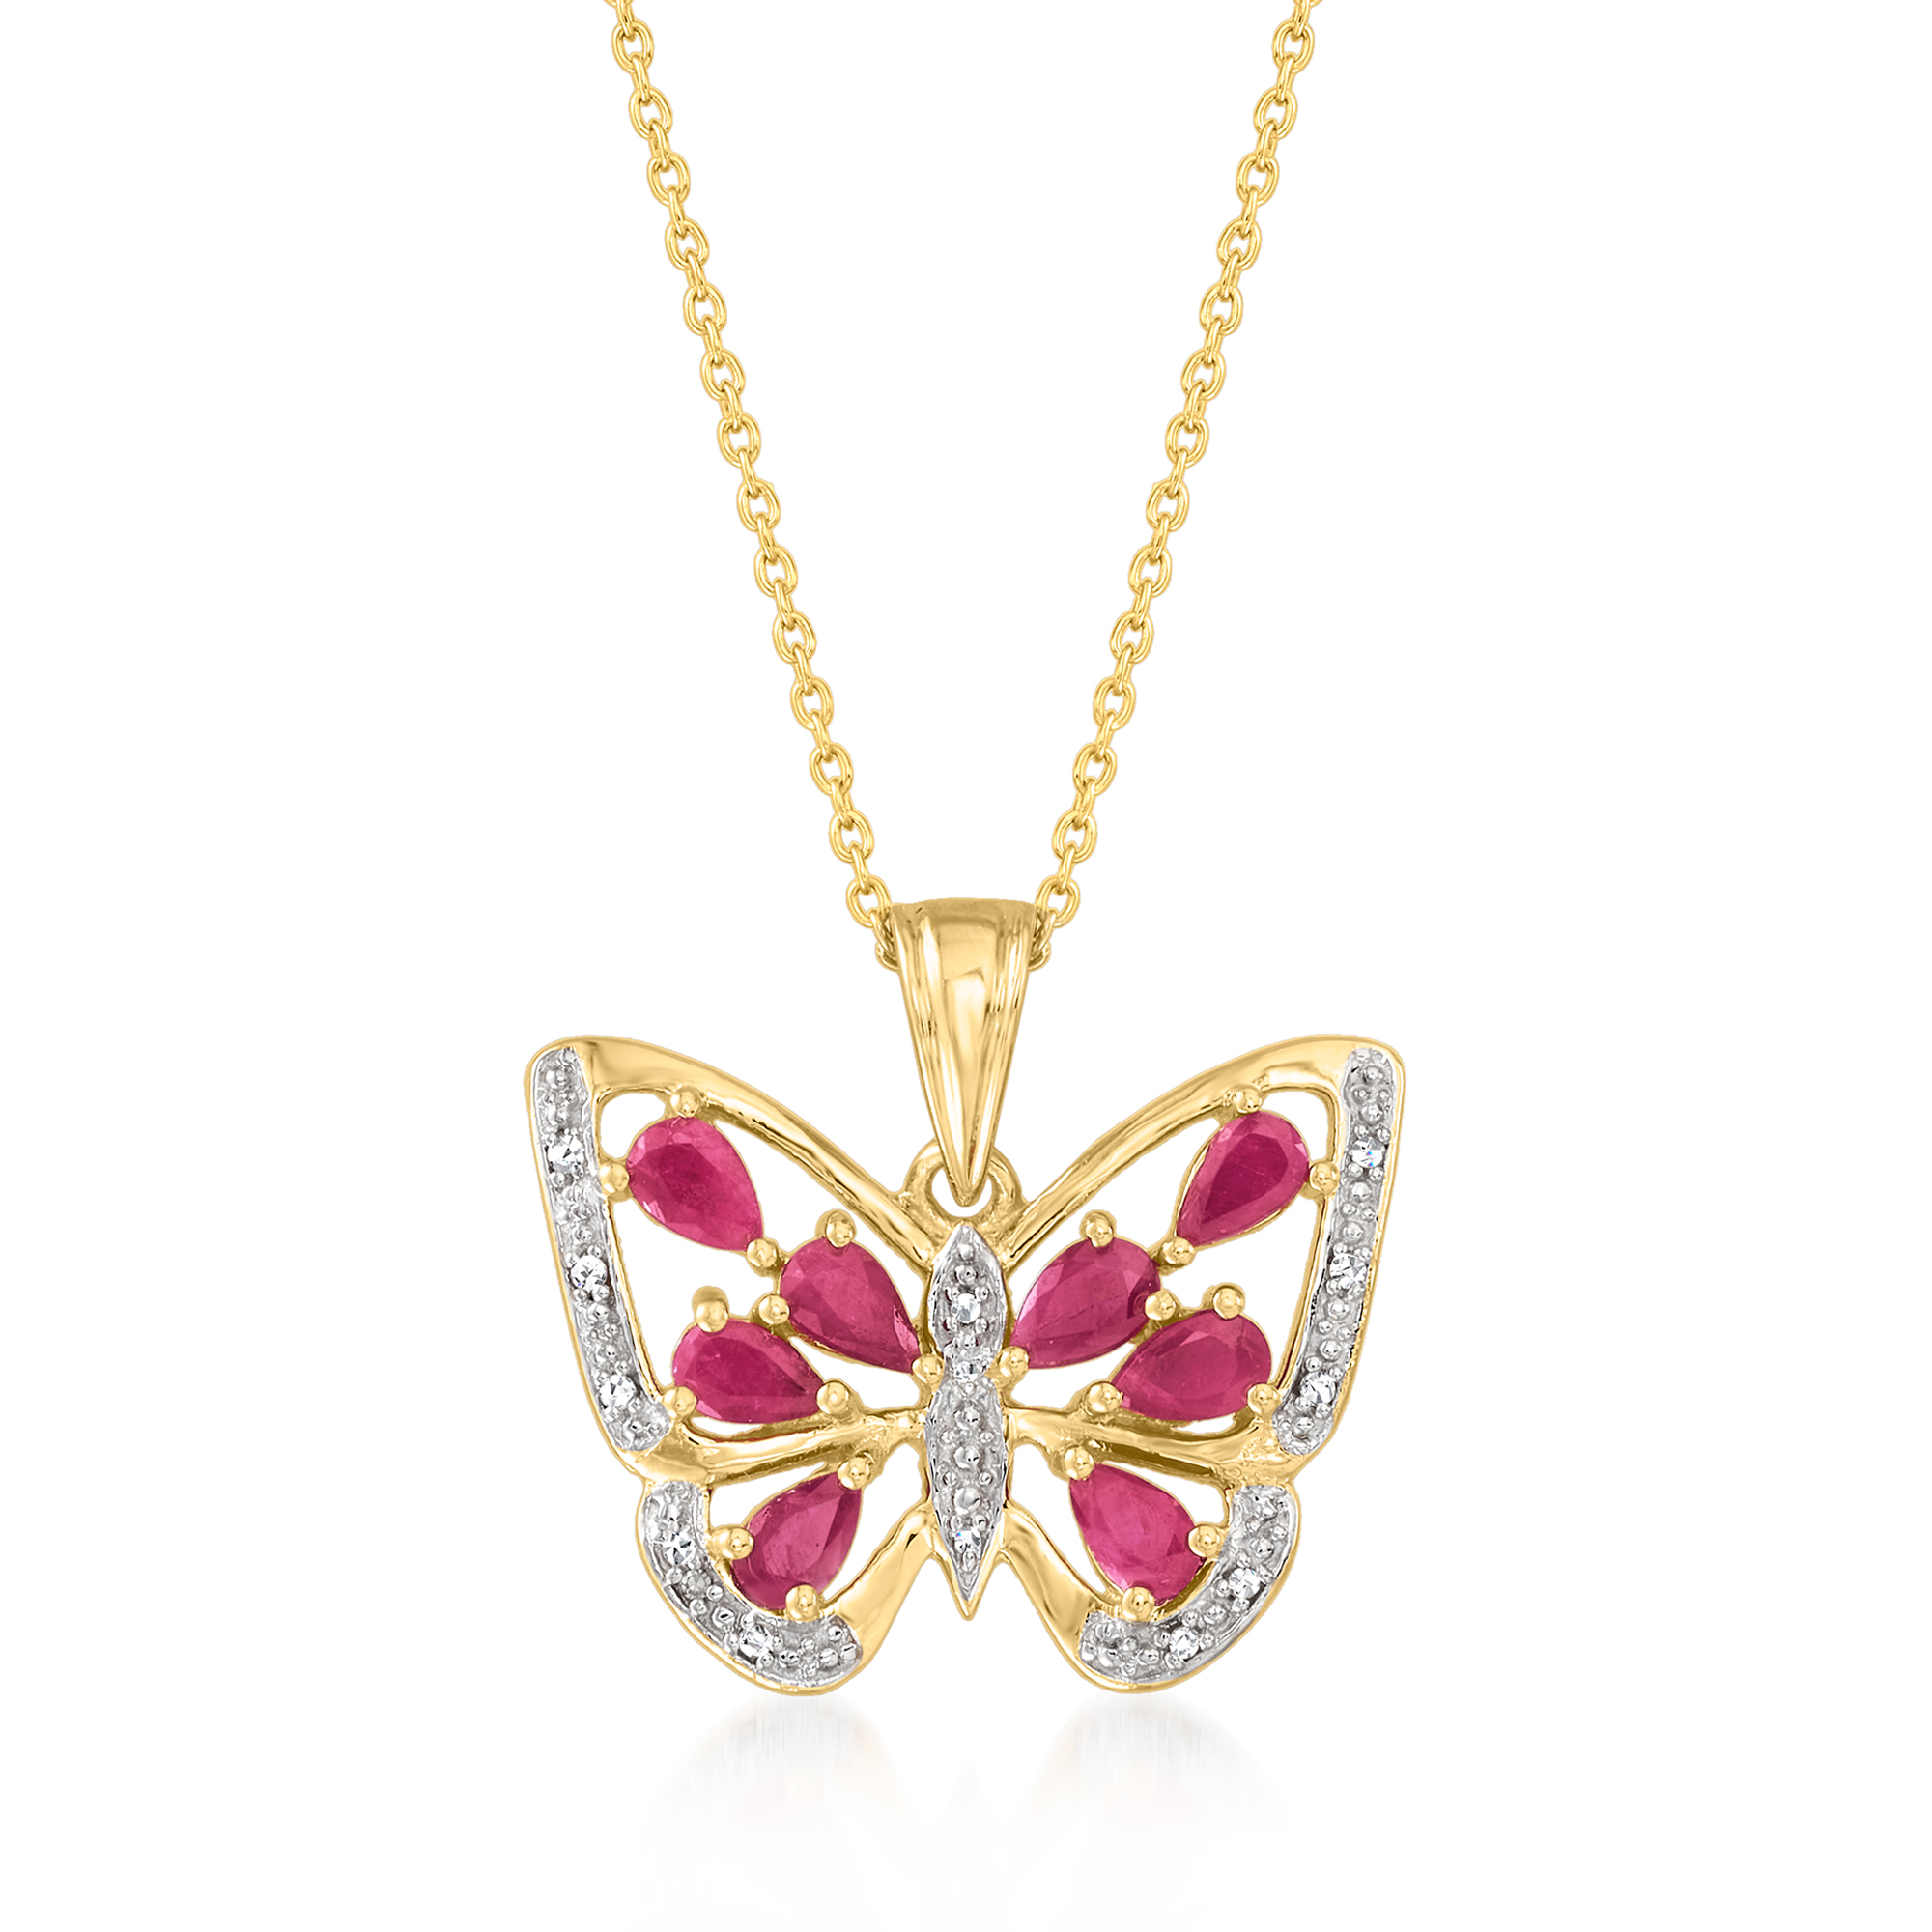 3 Ct Round Cut Simulated Ruby Butterfly Pendant Necklace 14k Yellow Gold  Plated | eBay